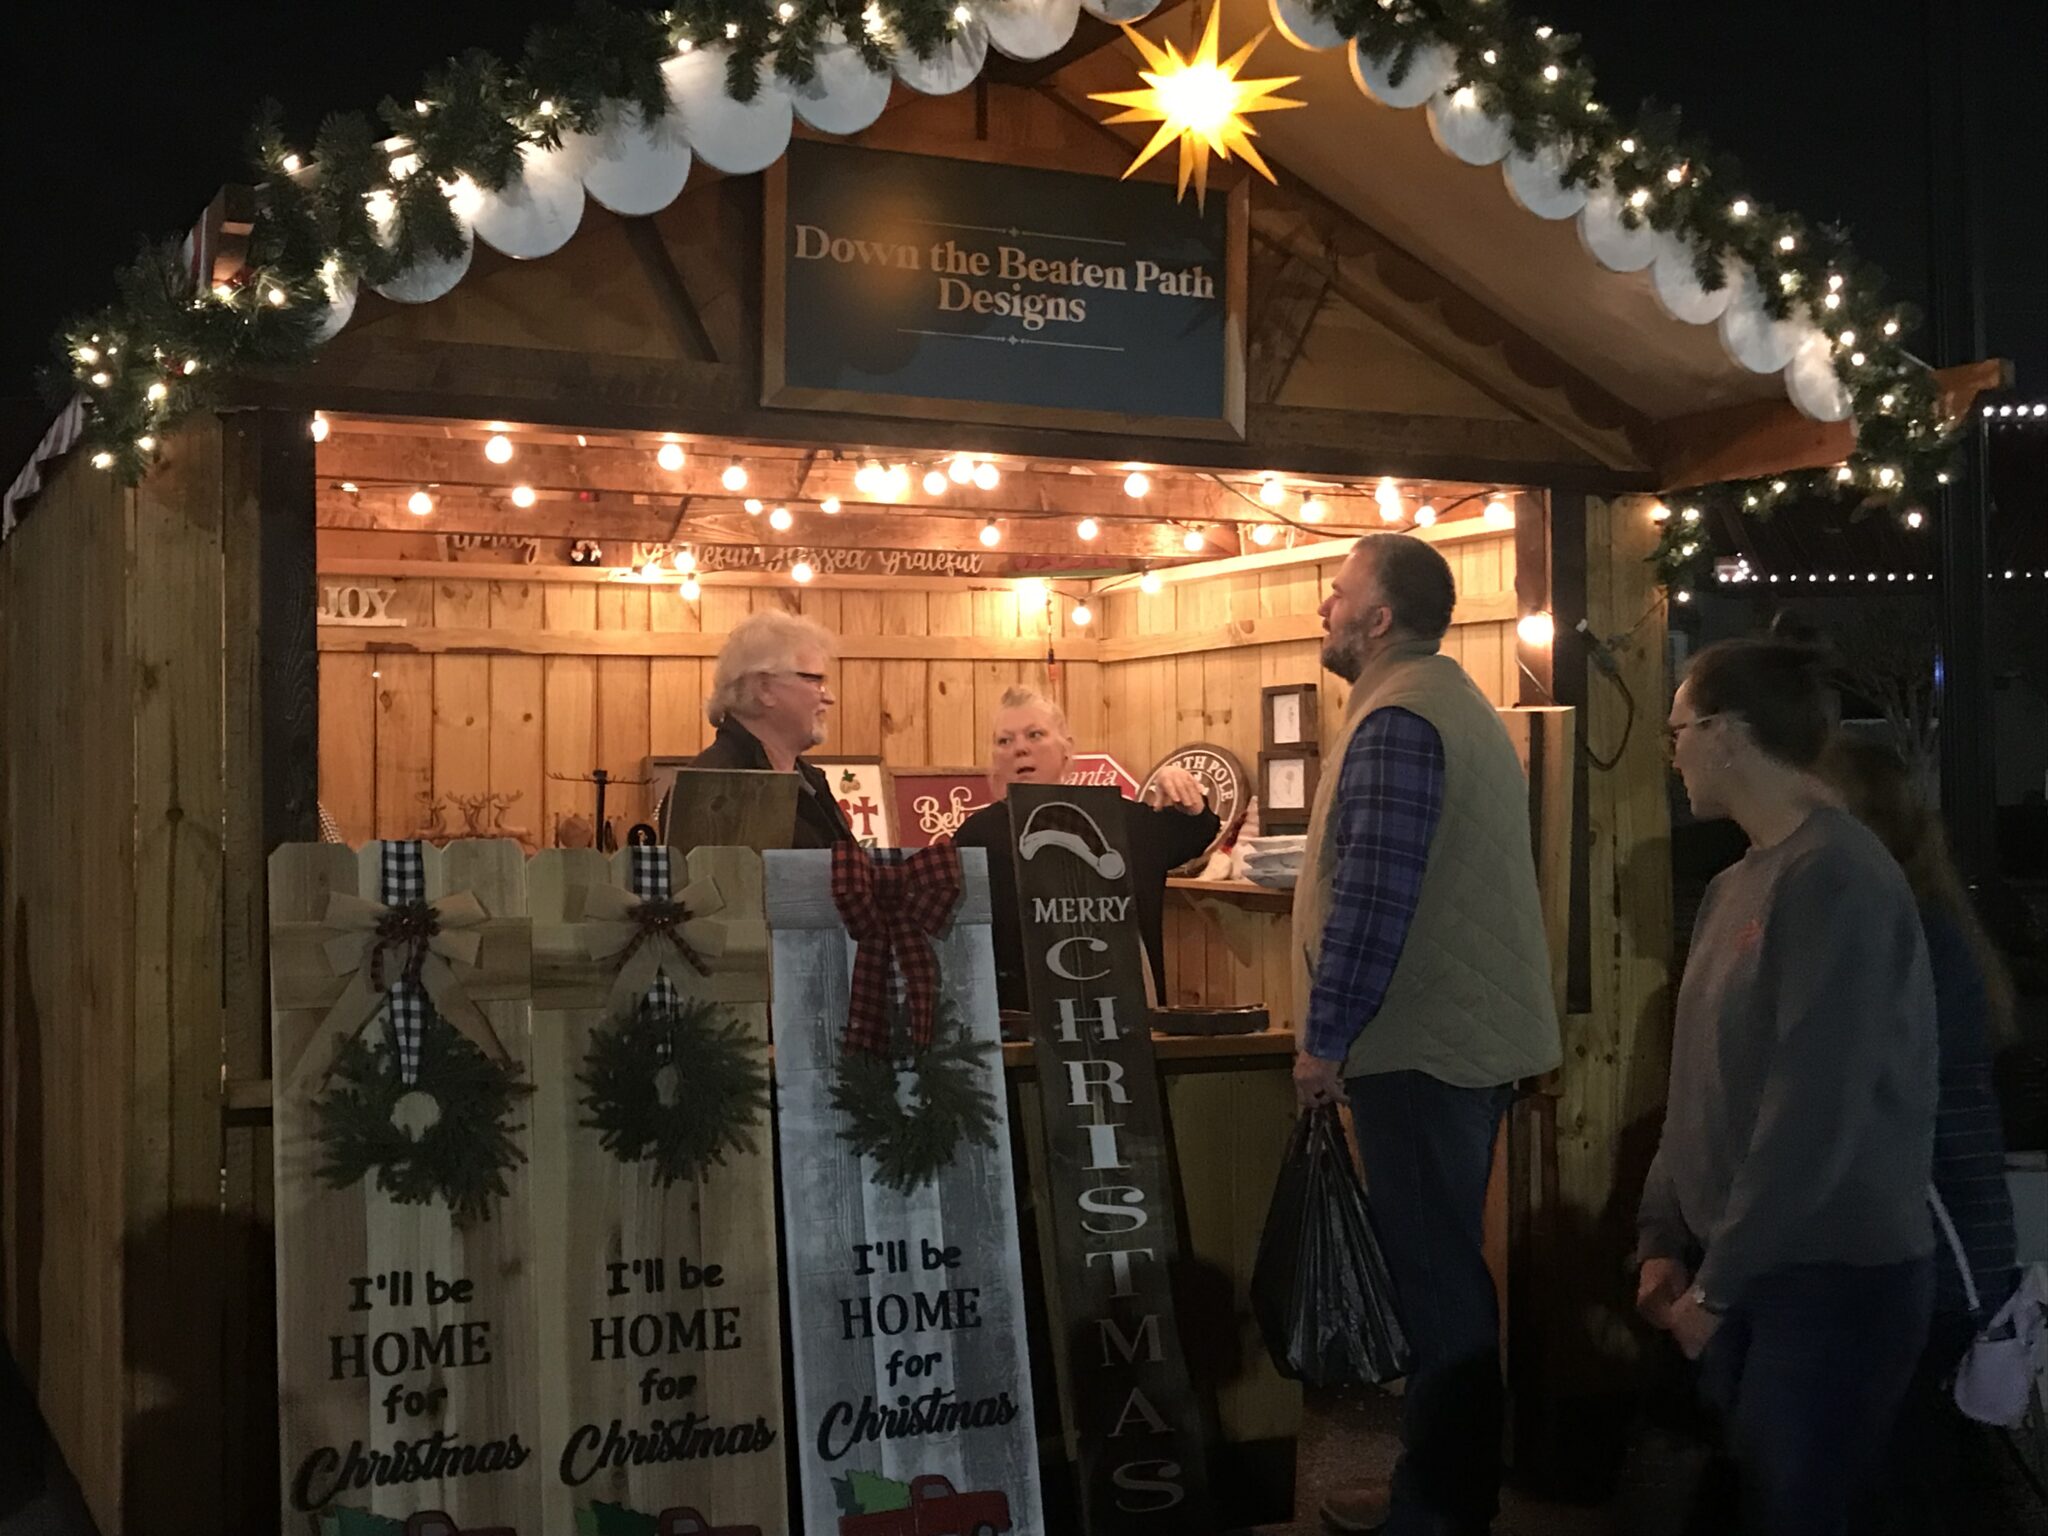 The City of Cullman celebrates German roots with Christkindlmarkt Dec